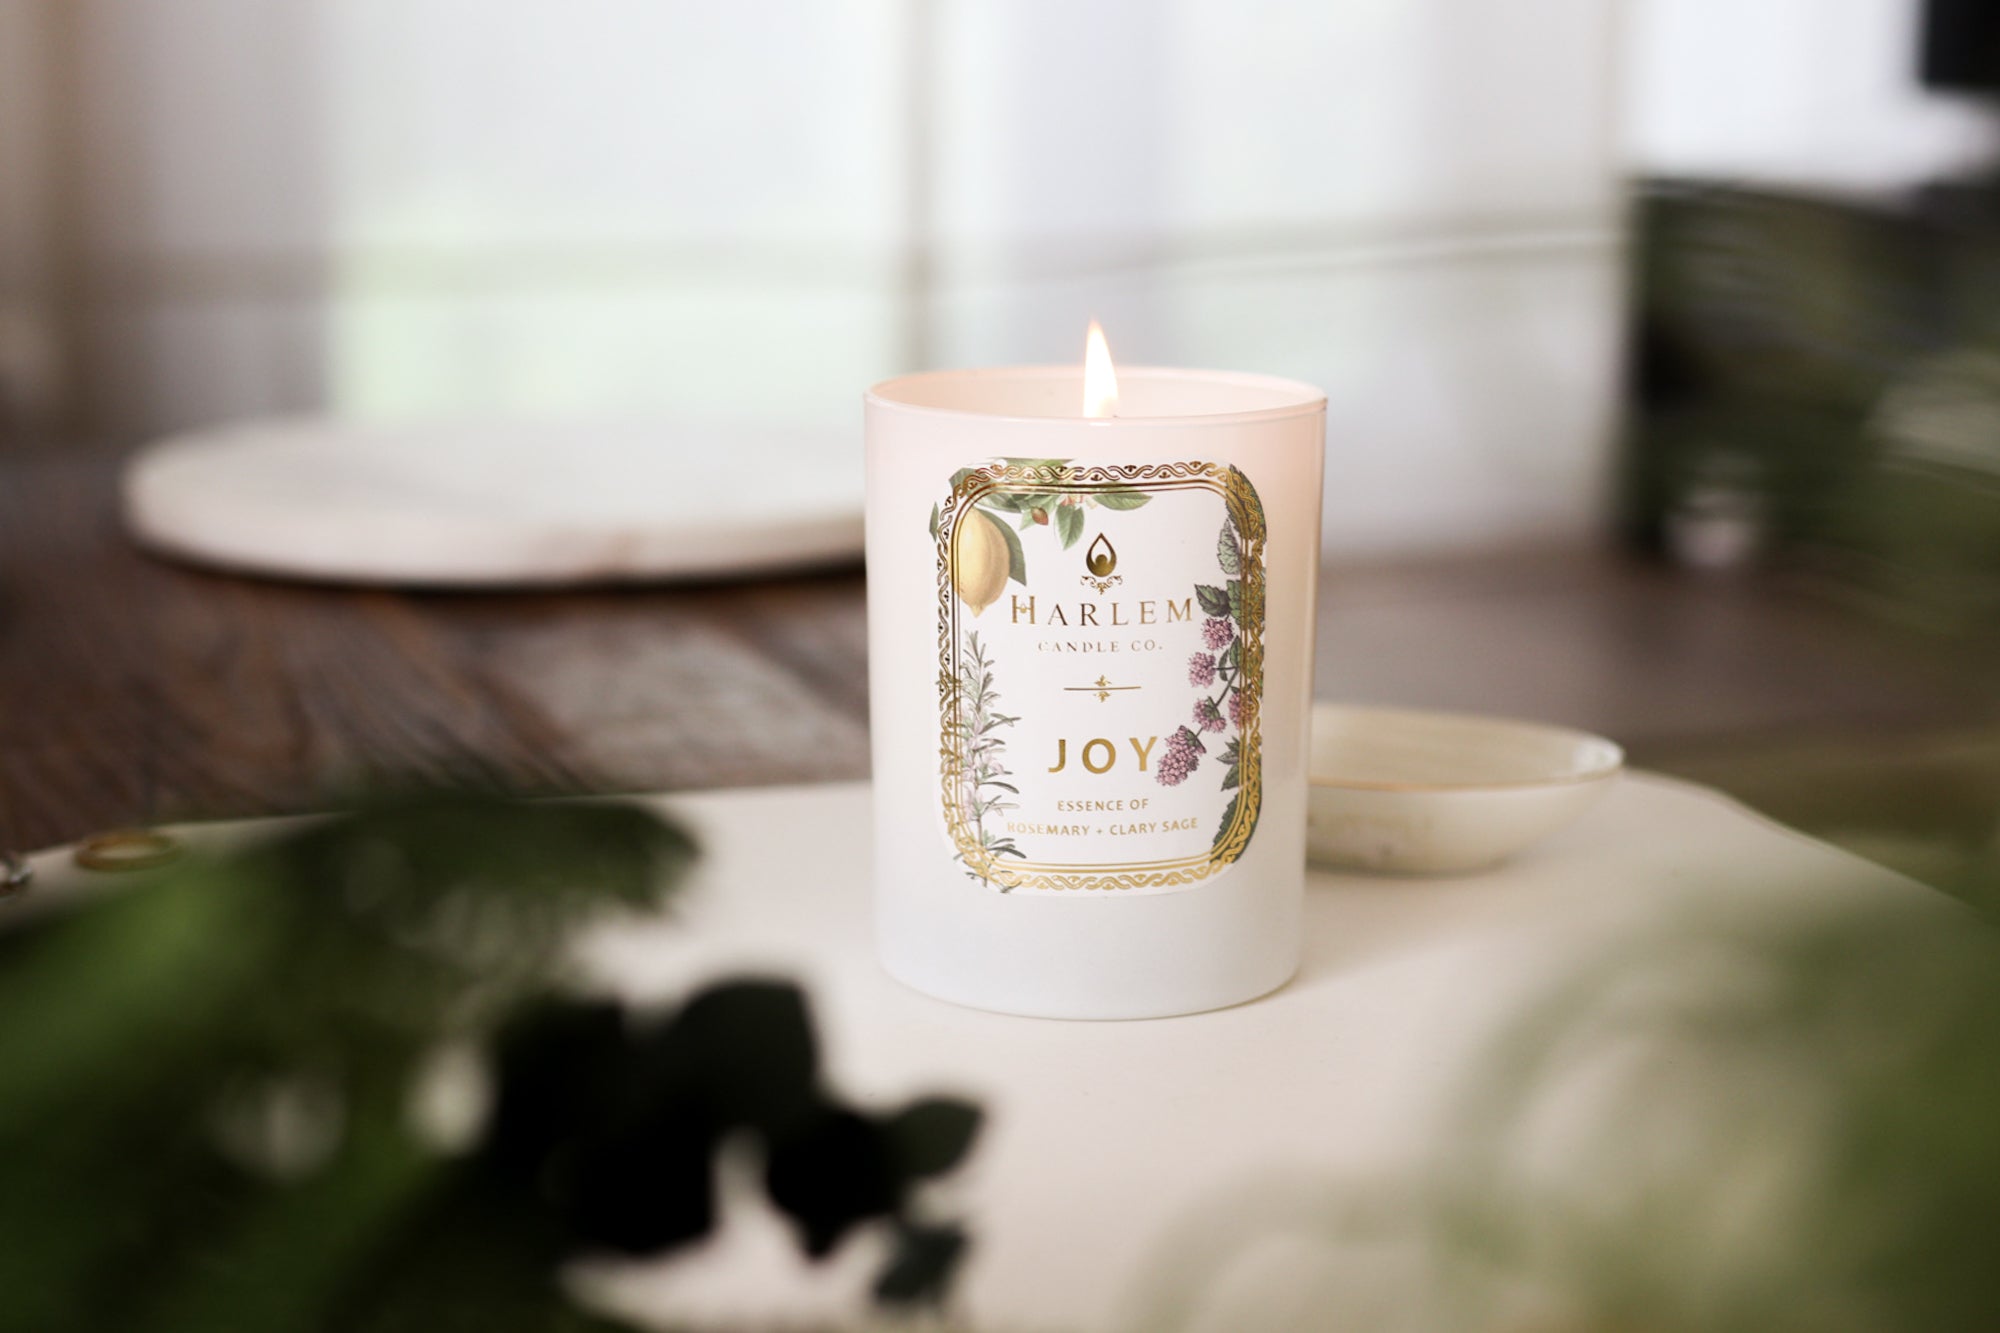 This is an image of the "Joy" Luxury Candle on a wooden table with a white place mat and greenery in the foreground.